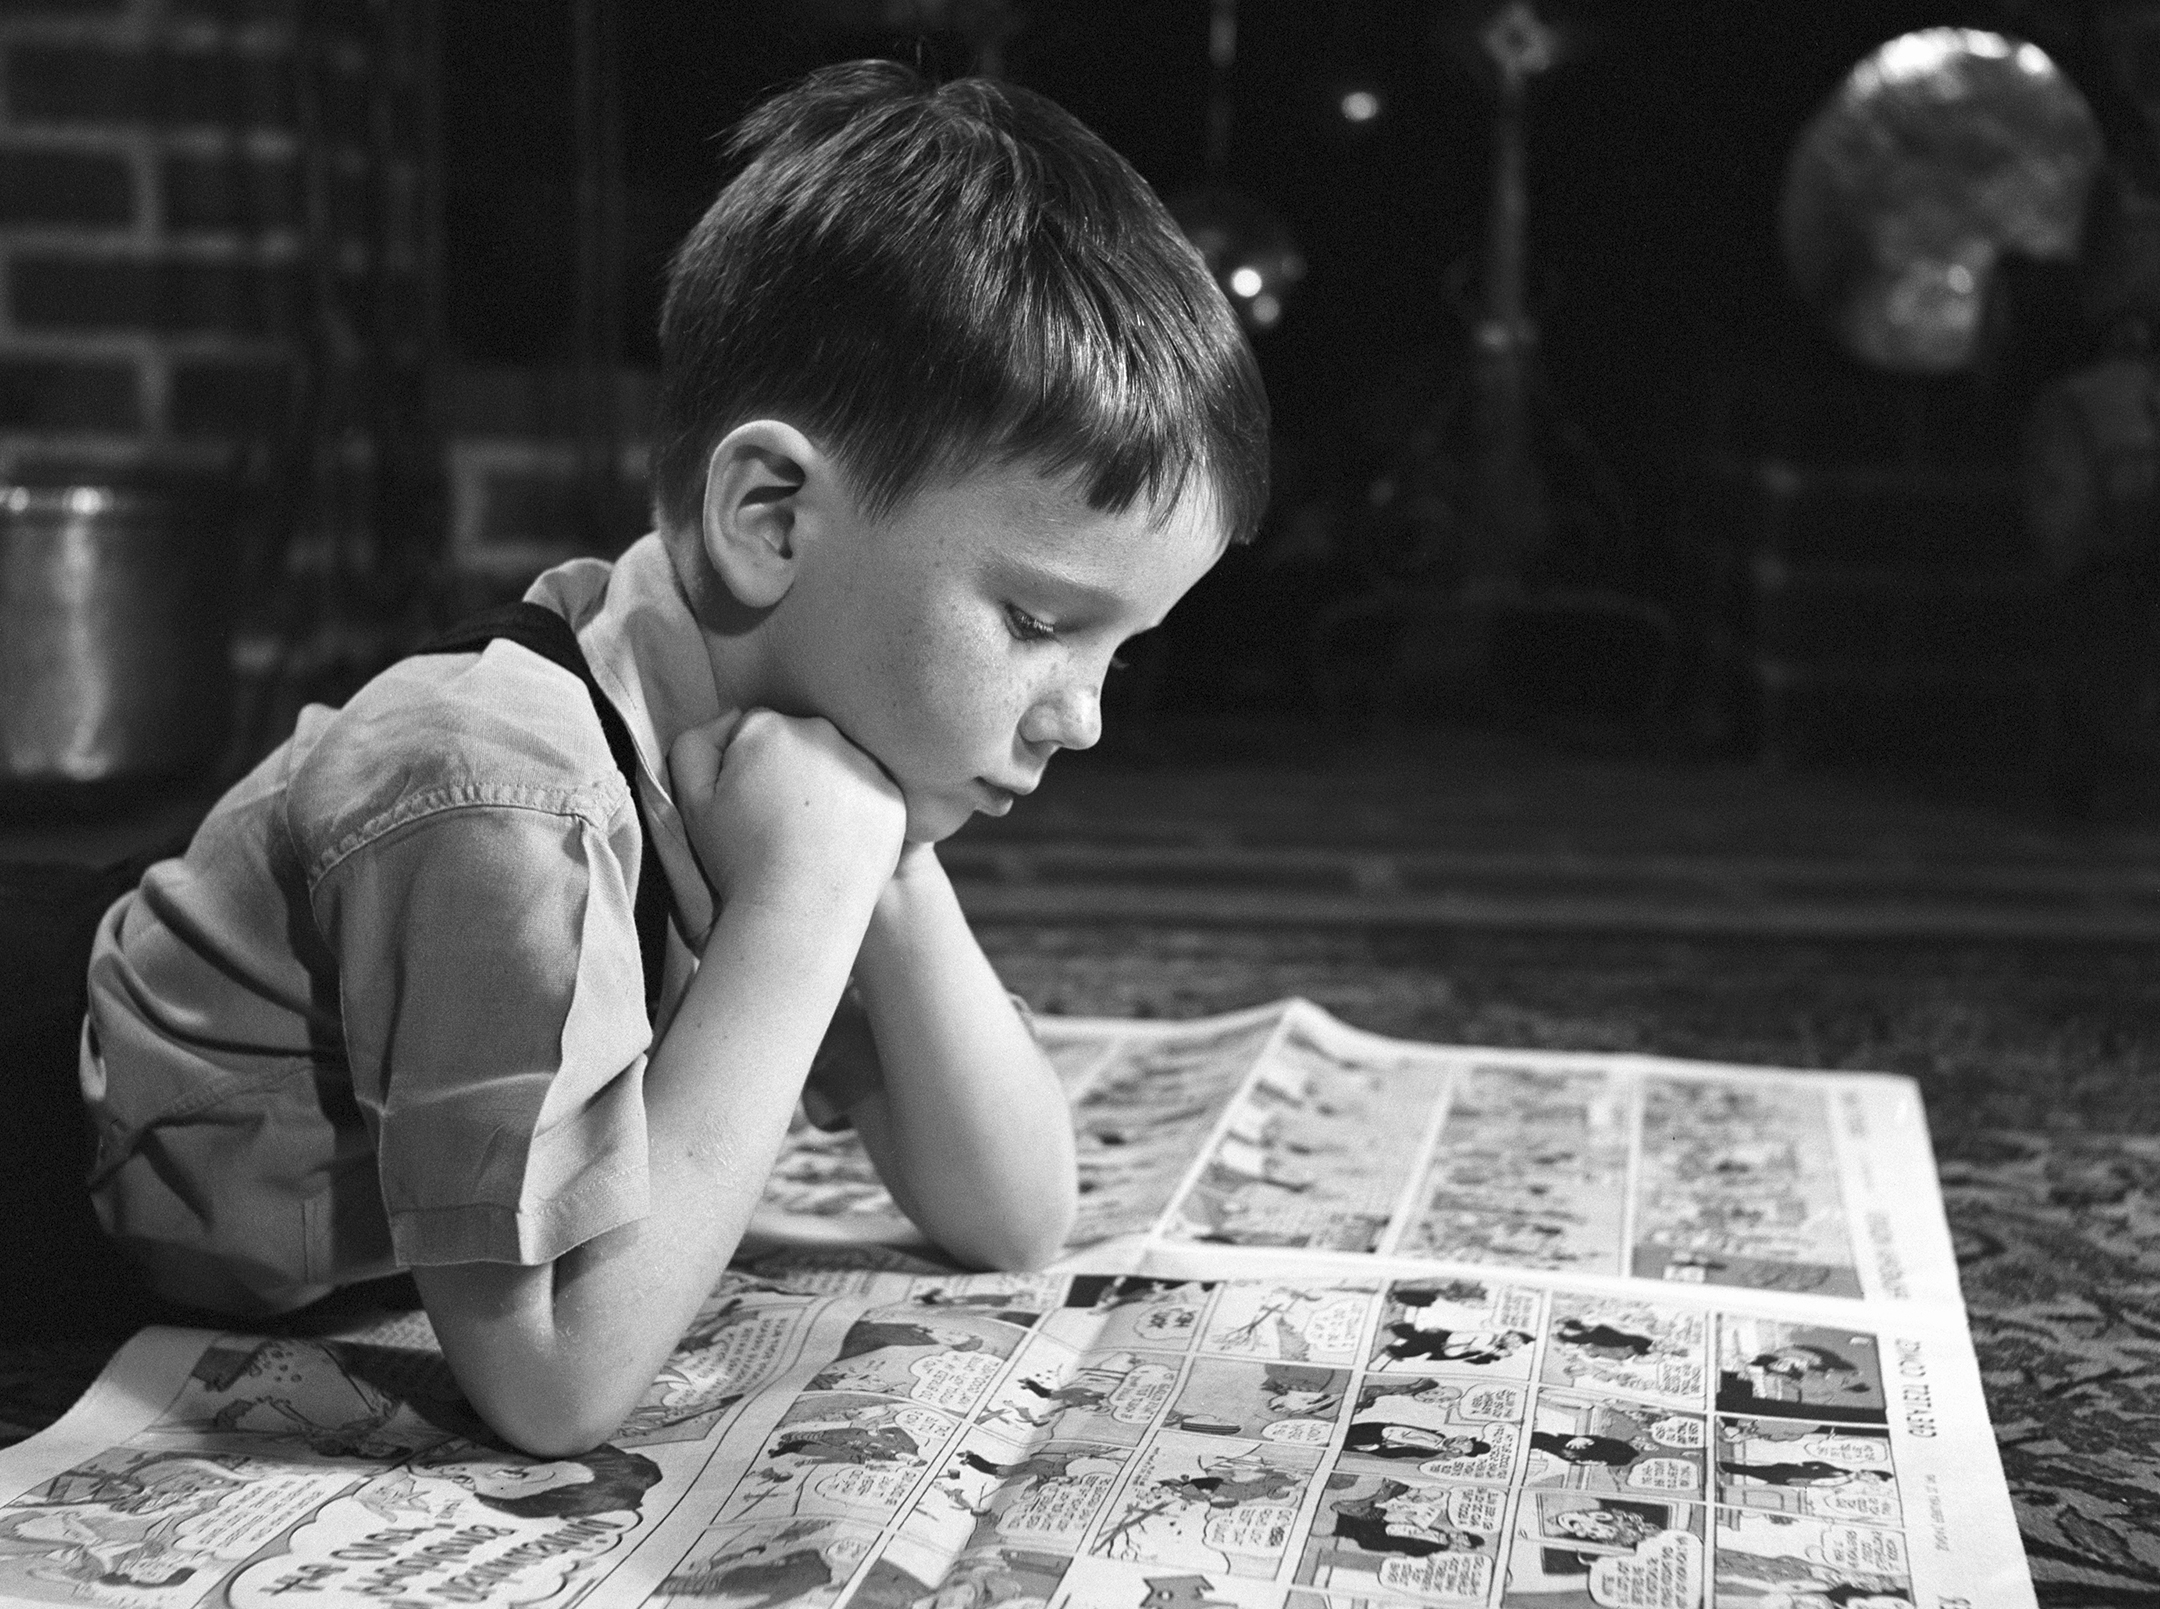 Black and white photo of a boy reading comic newspaper pages on the floor inside a house.